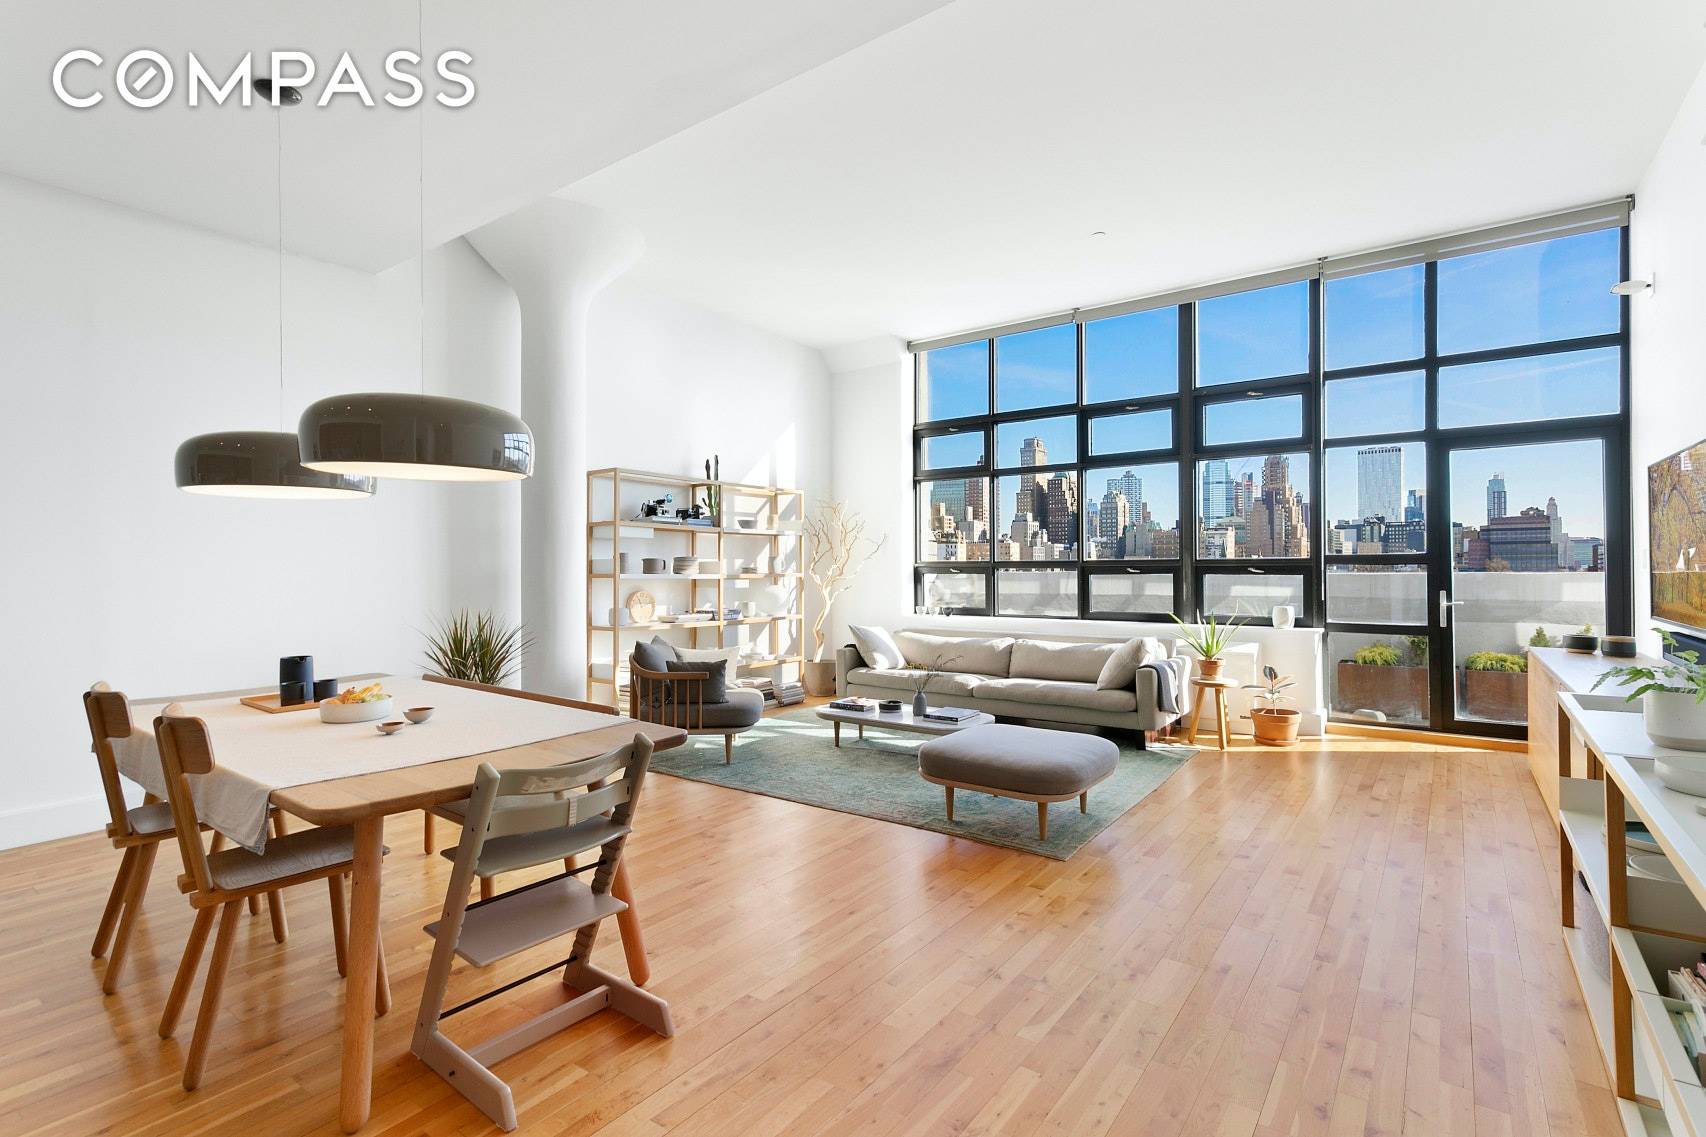 Stunning 1493 s f condo loft apt with 186 s f terrace, enjoying unobstructed eastern views of downtown Brooklyn skyline and sunrises This stunning 2 Bedroom 2 bath 1493 s ...